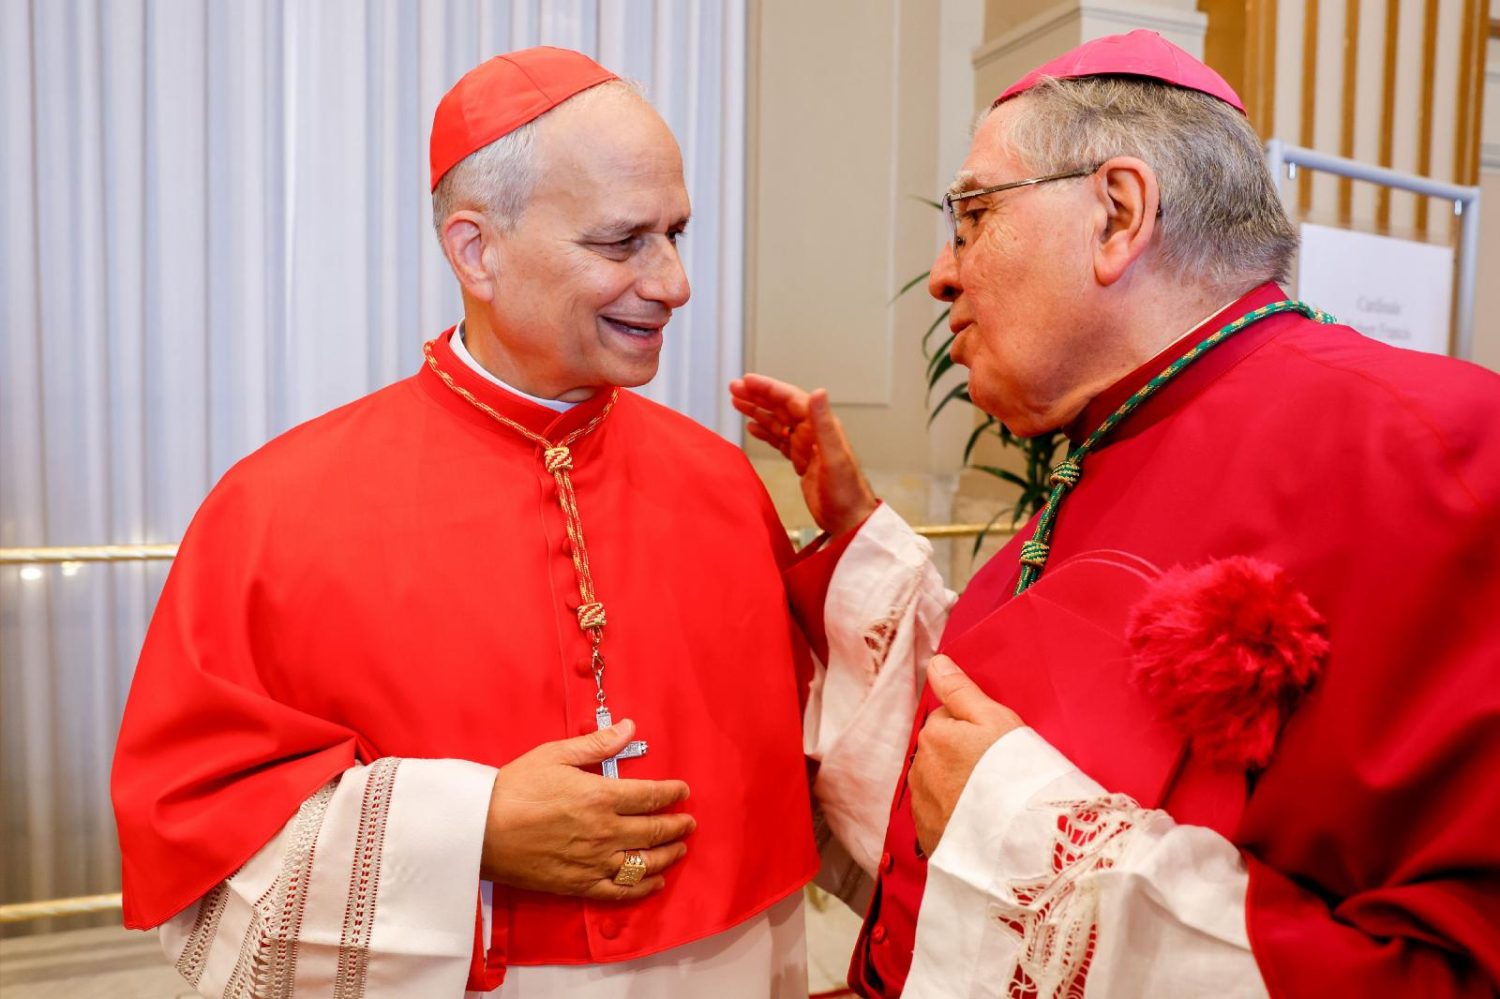 Read more about the article Bishops must promote communion, unity with pope, new U.S. cardinal says